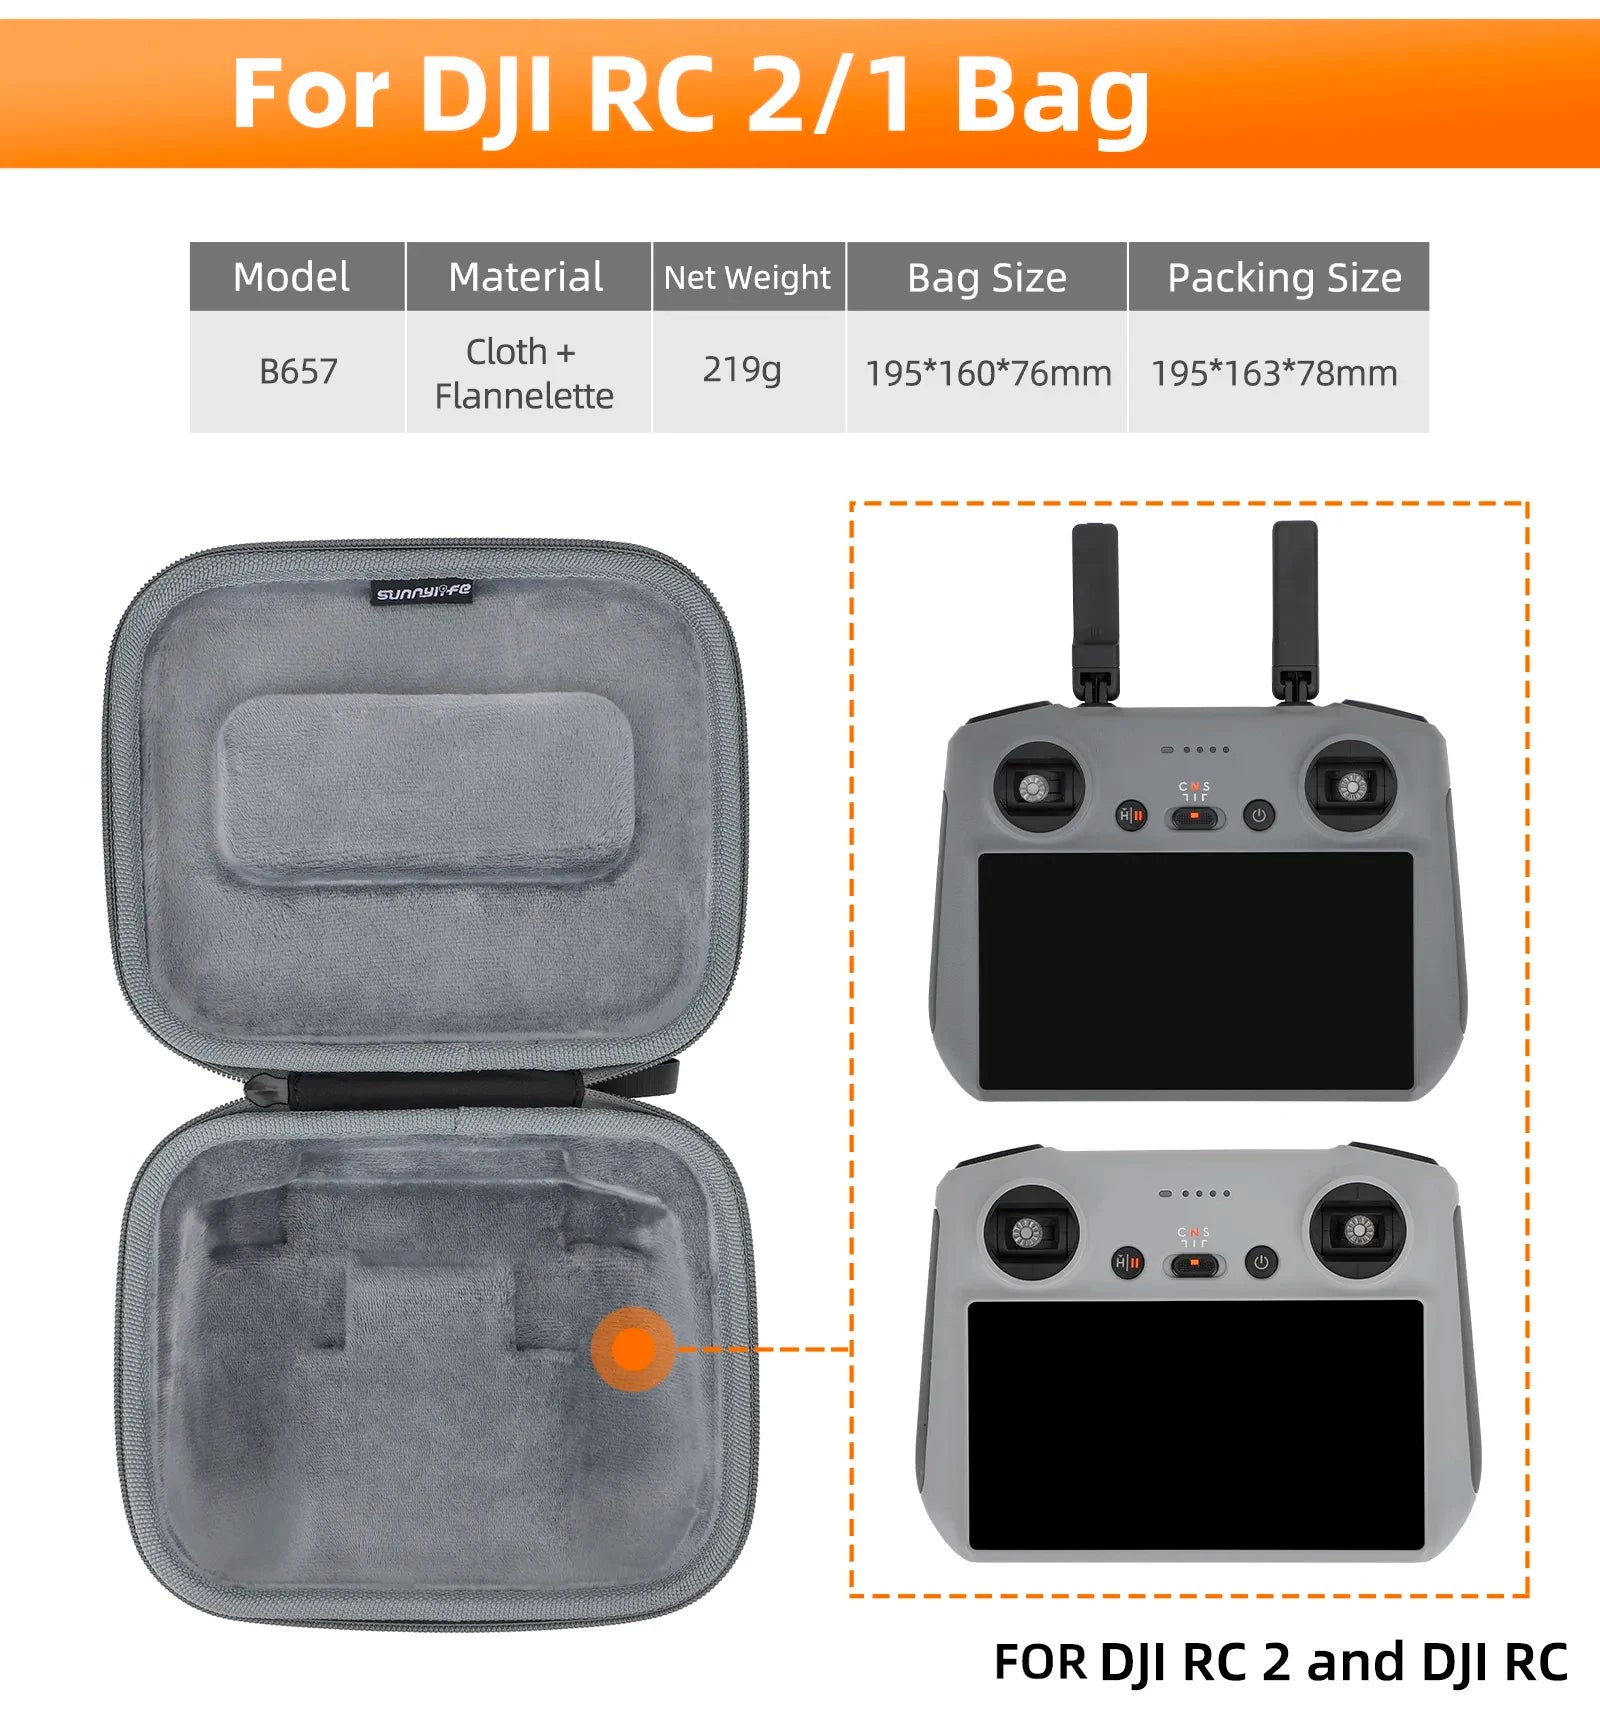 Portable Carrying Case For DJI Mini 4 Pro, Flannelette Sunnyiefe FOR DJI RC 2 & RC2